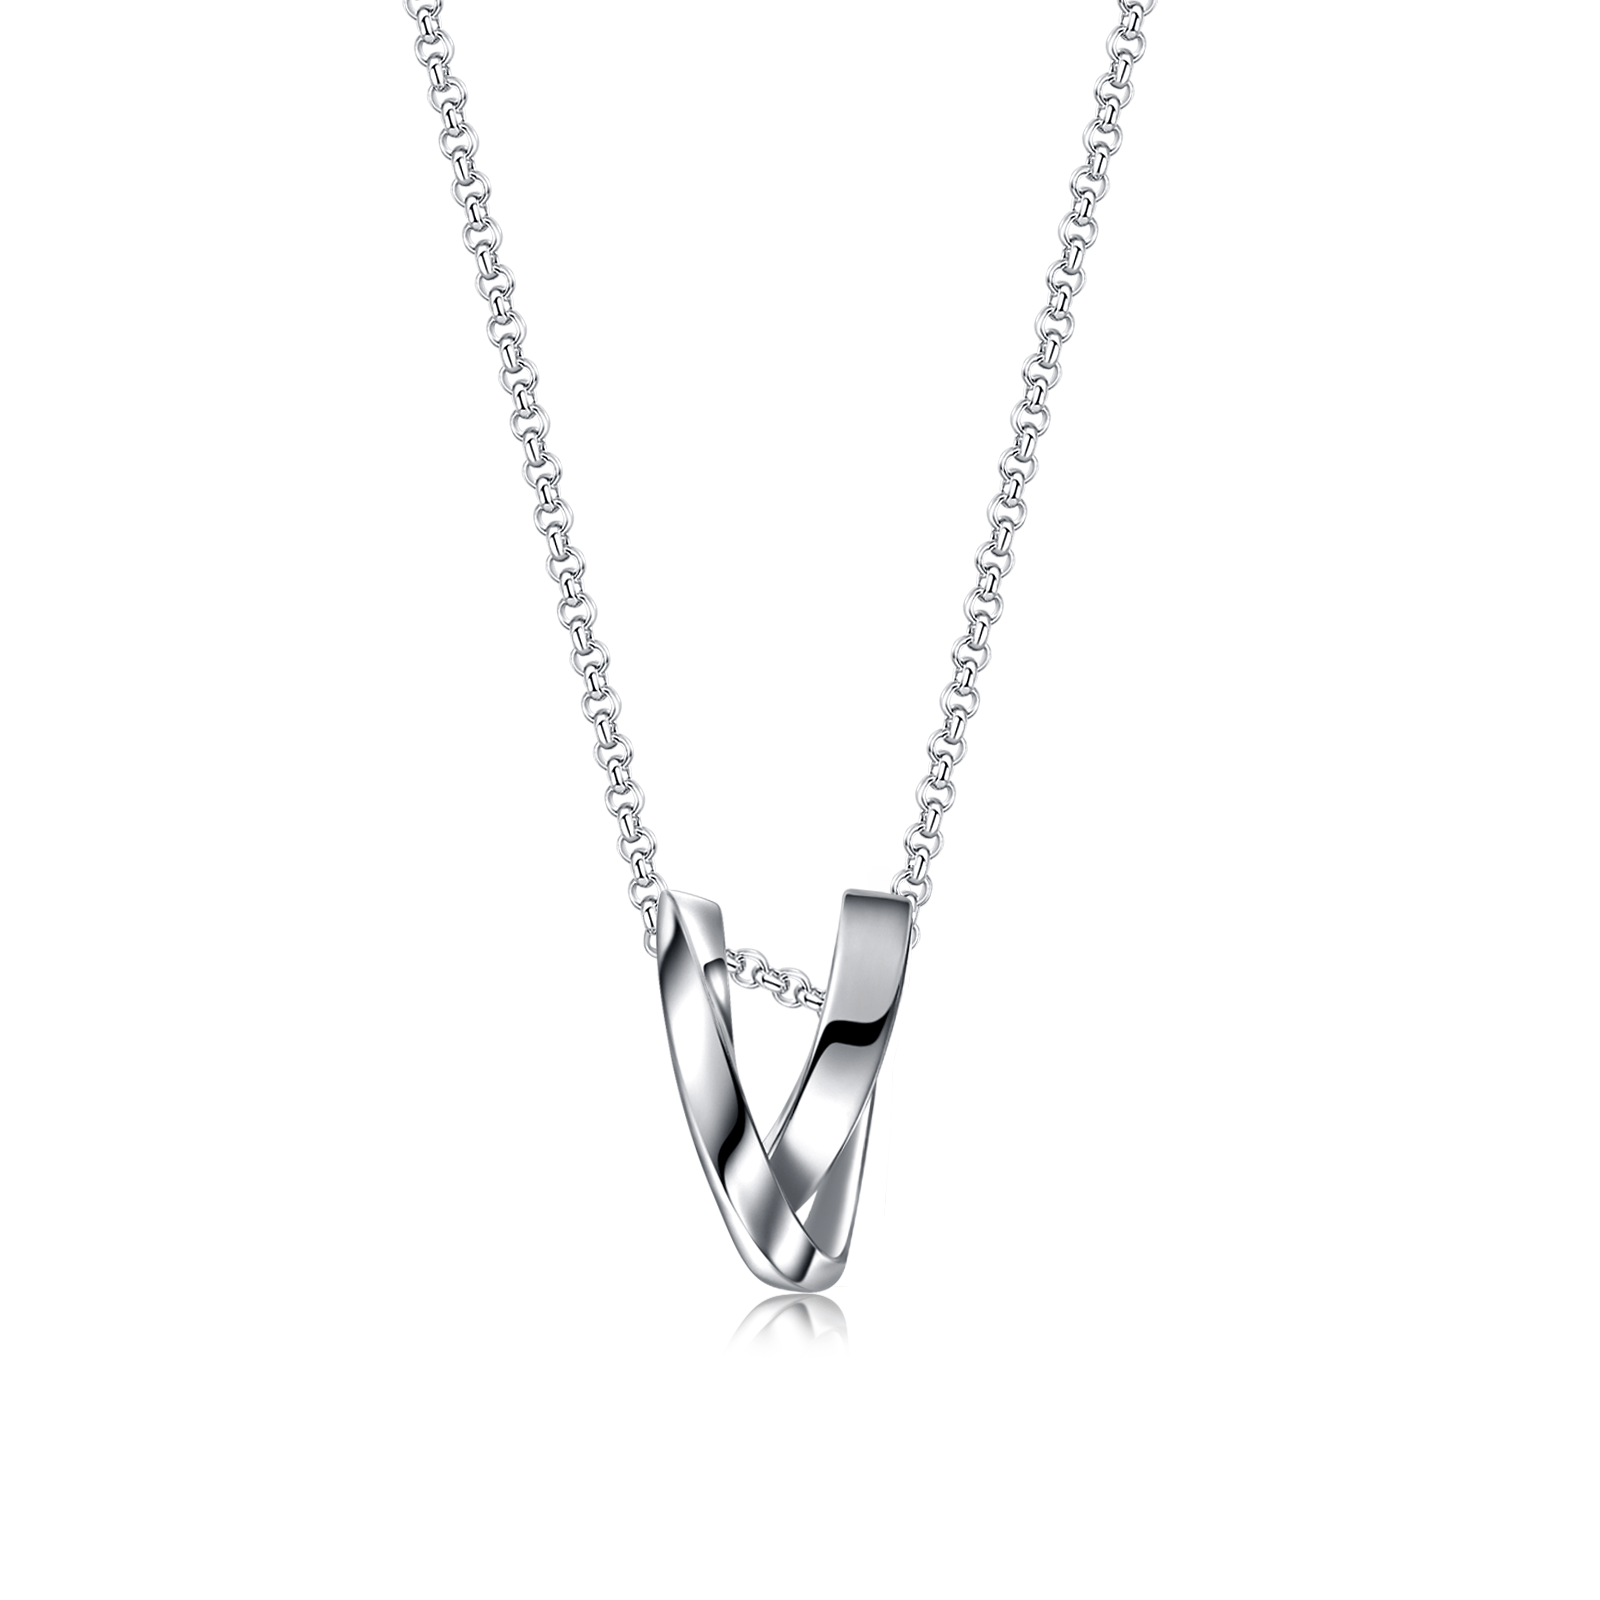 FANCIME "Unconditional Love" Mobius Loop Sterling Silver Necklace Male